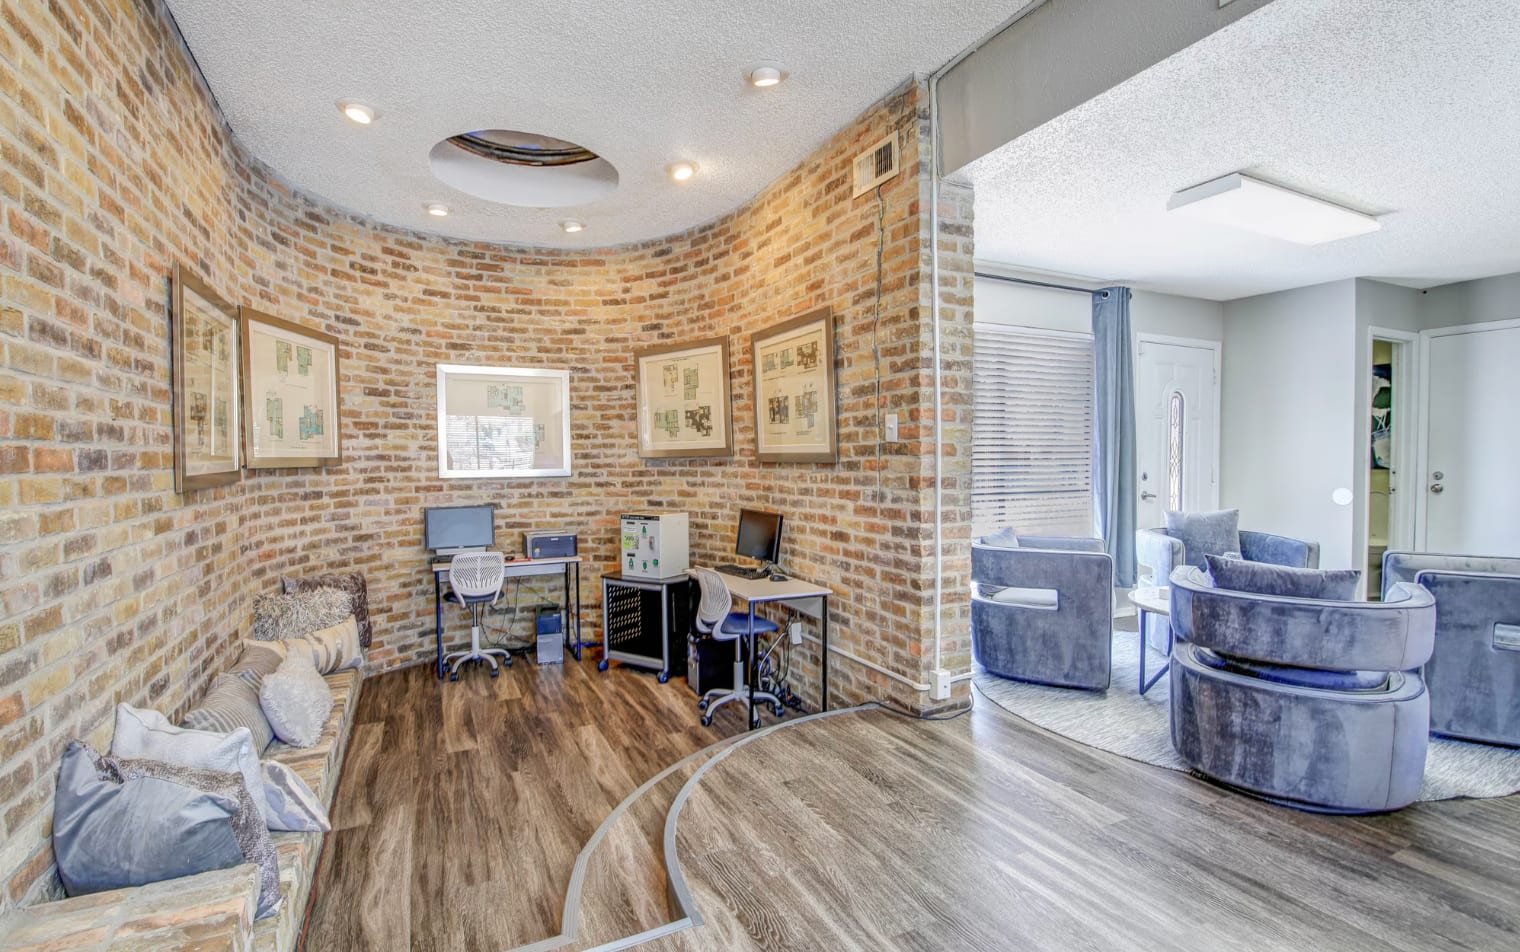 Upscale San Antonio Apartments in the medical district, complete with a stylish living room featuring a fireplace and charming brick walls.